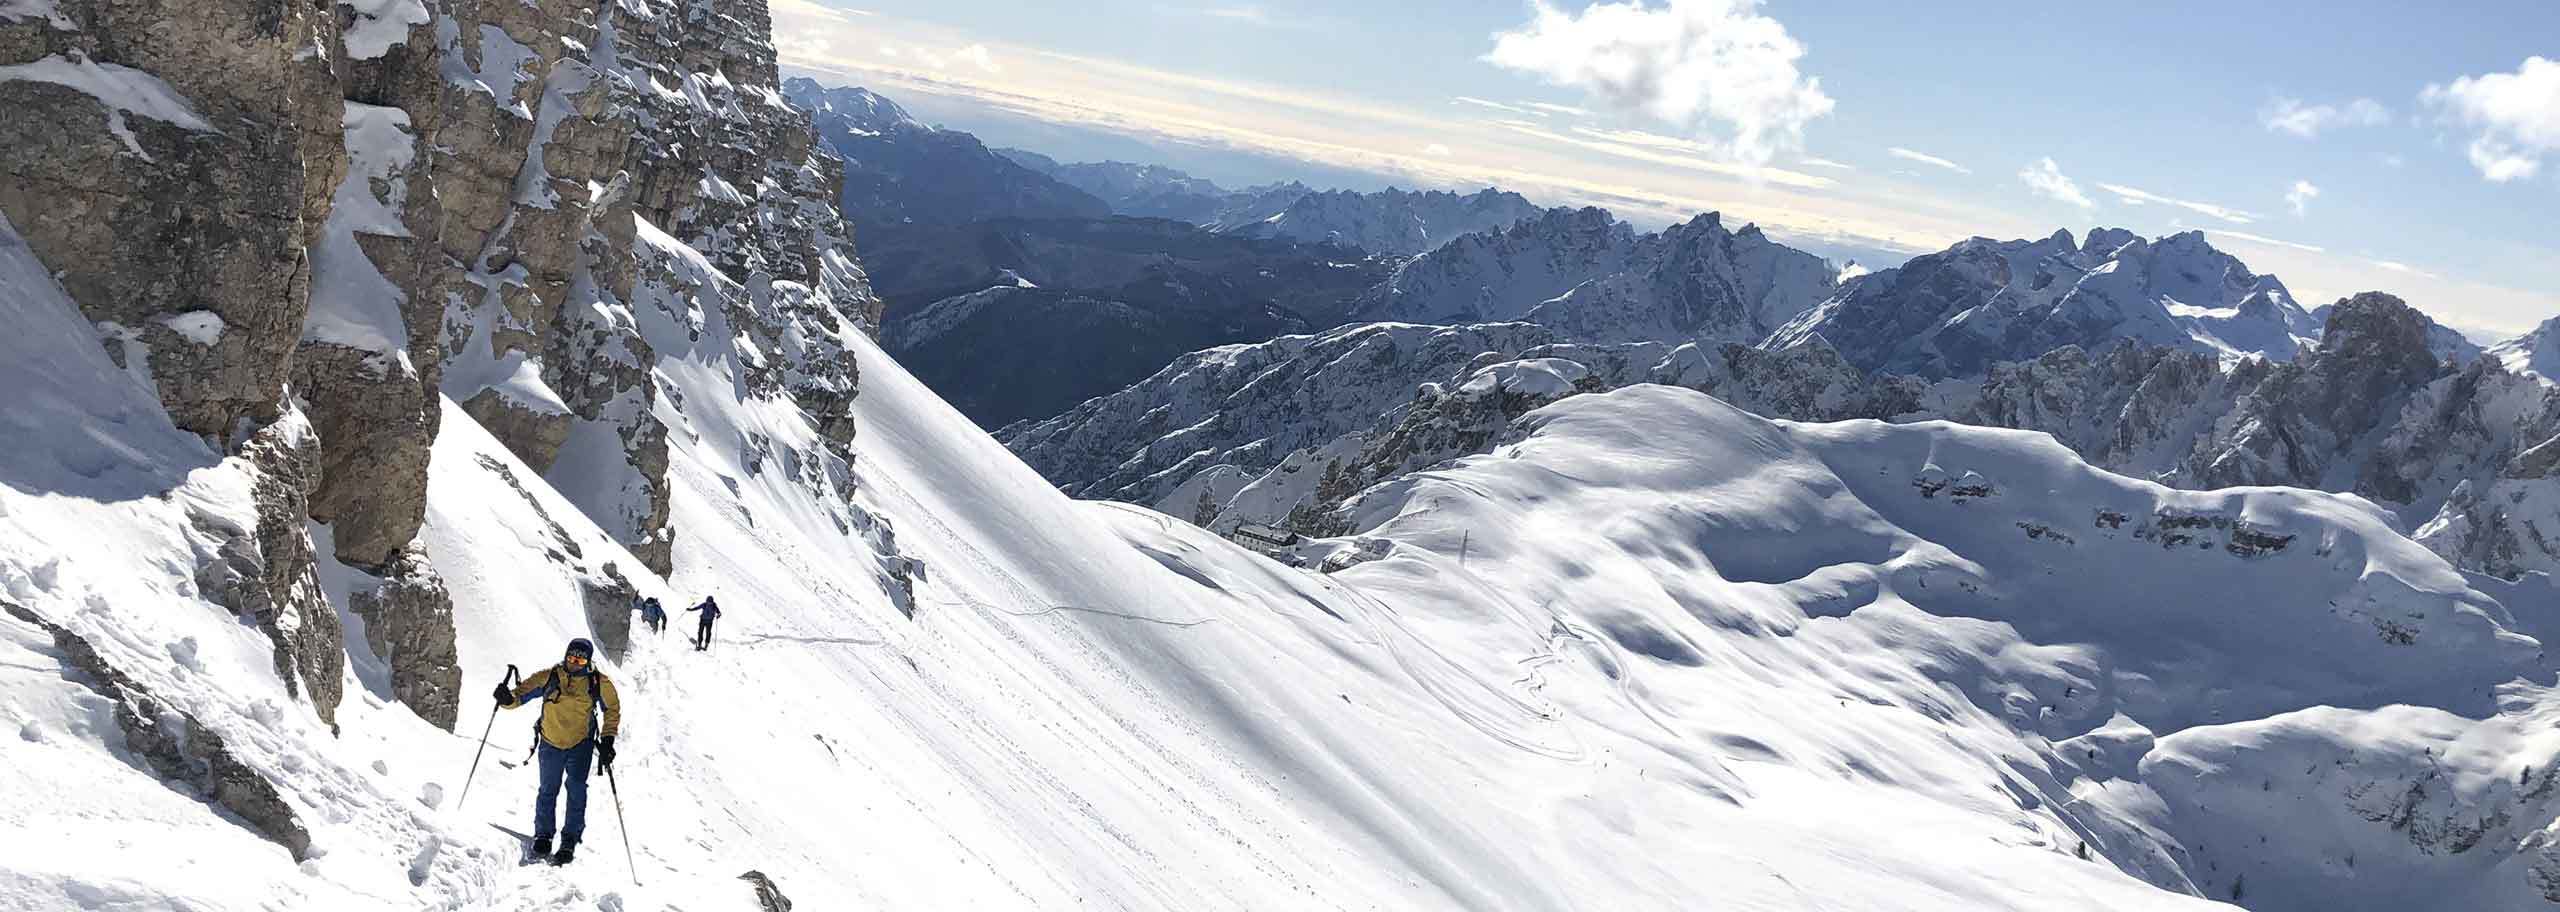 Ski Mountaineering in Auronzo di Cadore with a Mountain Guide